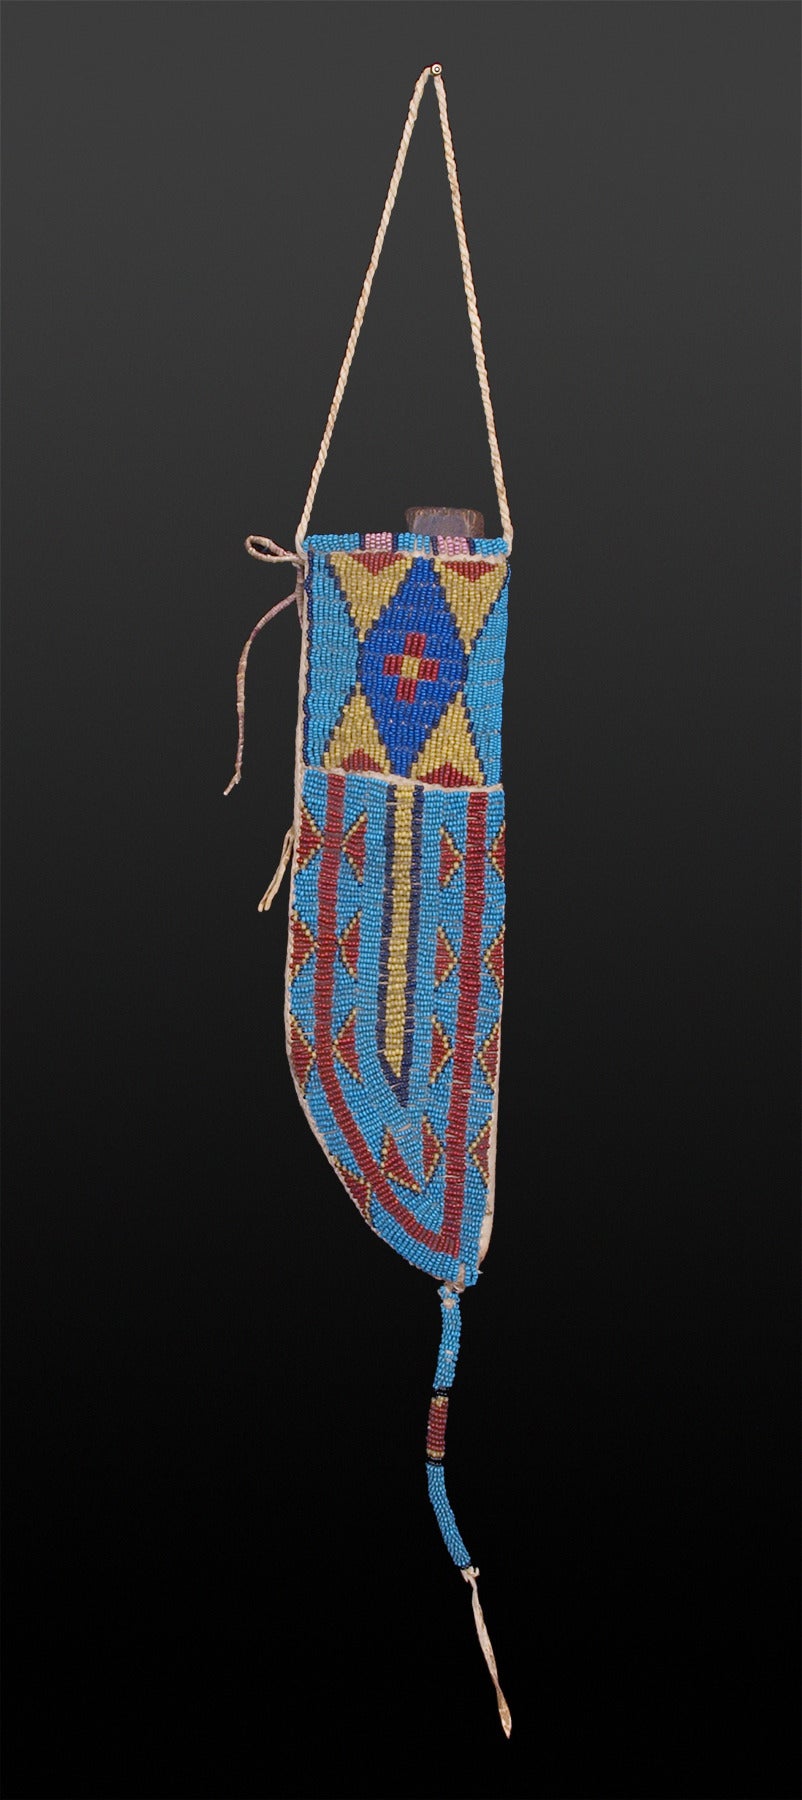 Constructed of native tanned hide, this 19th century Plains Indian knife sheath is expertly beaded in blue, yellow, black and red trade beads with stylized tepee and geometric motif. Suspension is fully beaded in the same colors.  Custom display